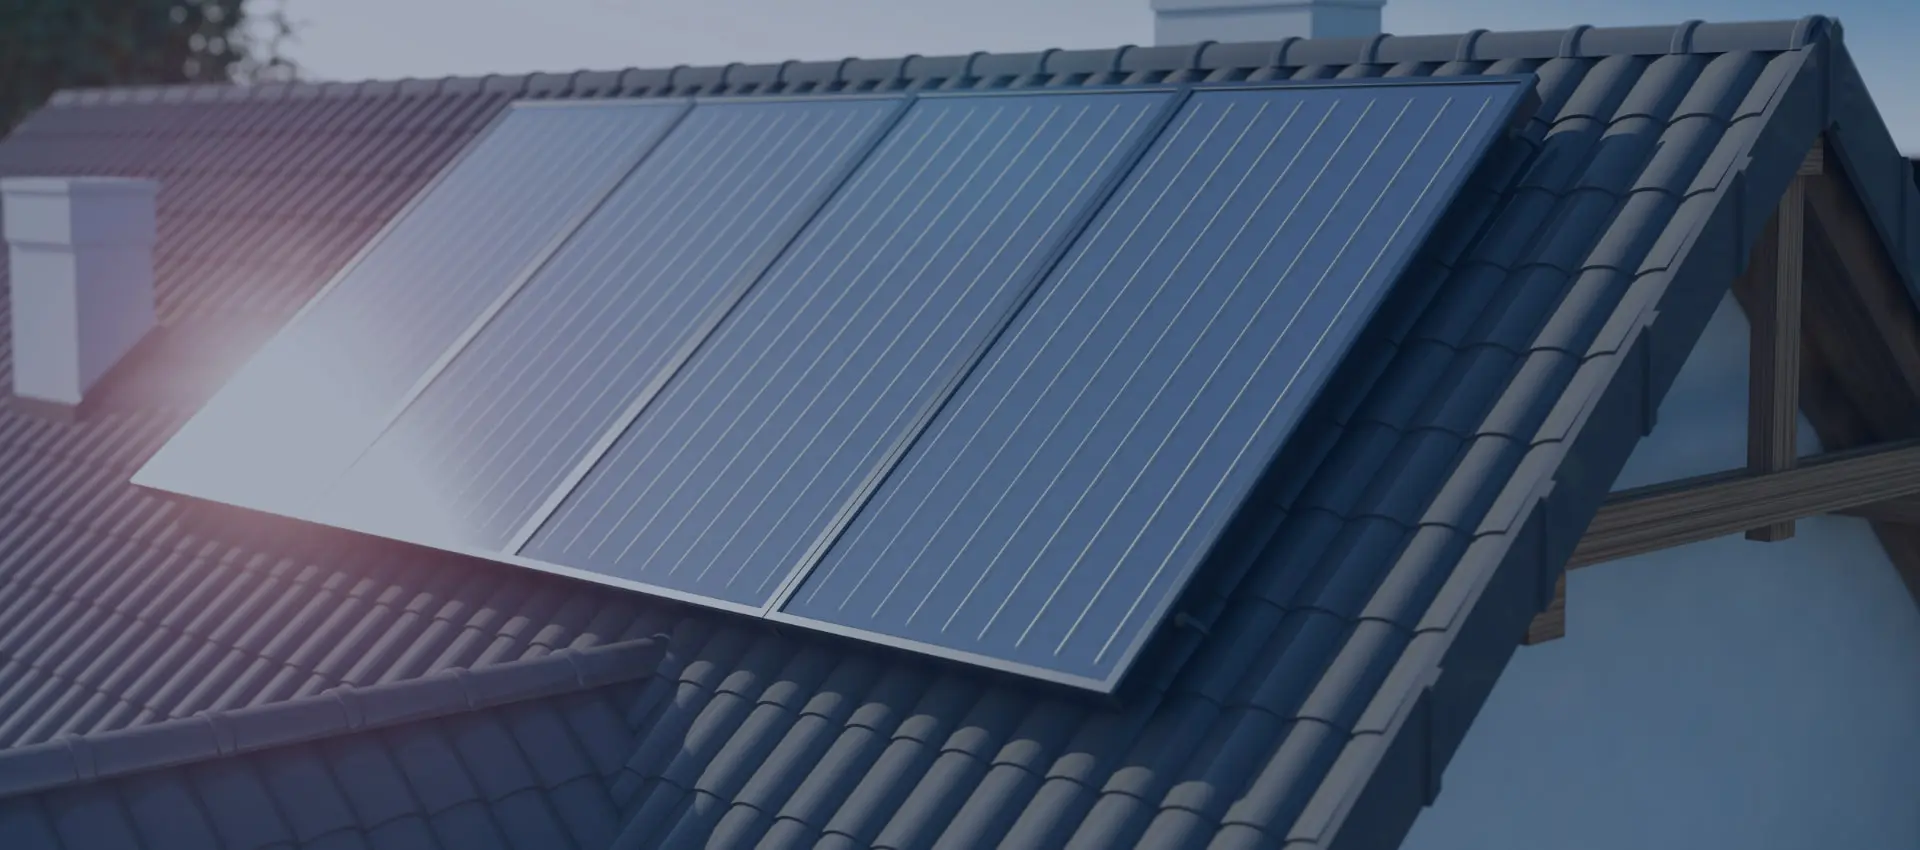 rooftop solar panels on a residential home capturing sunlight